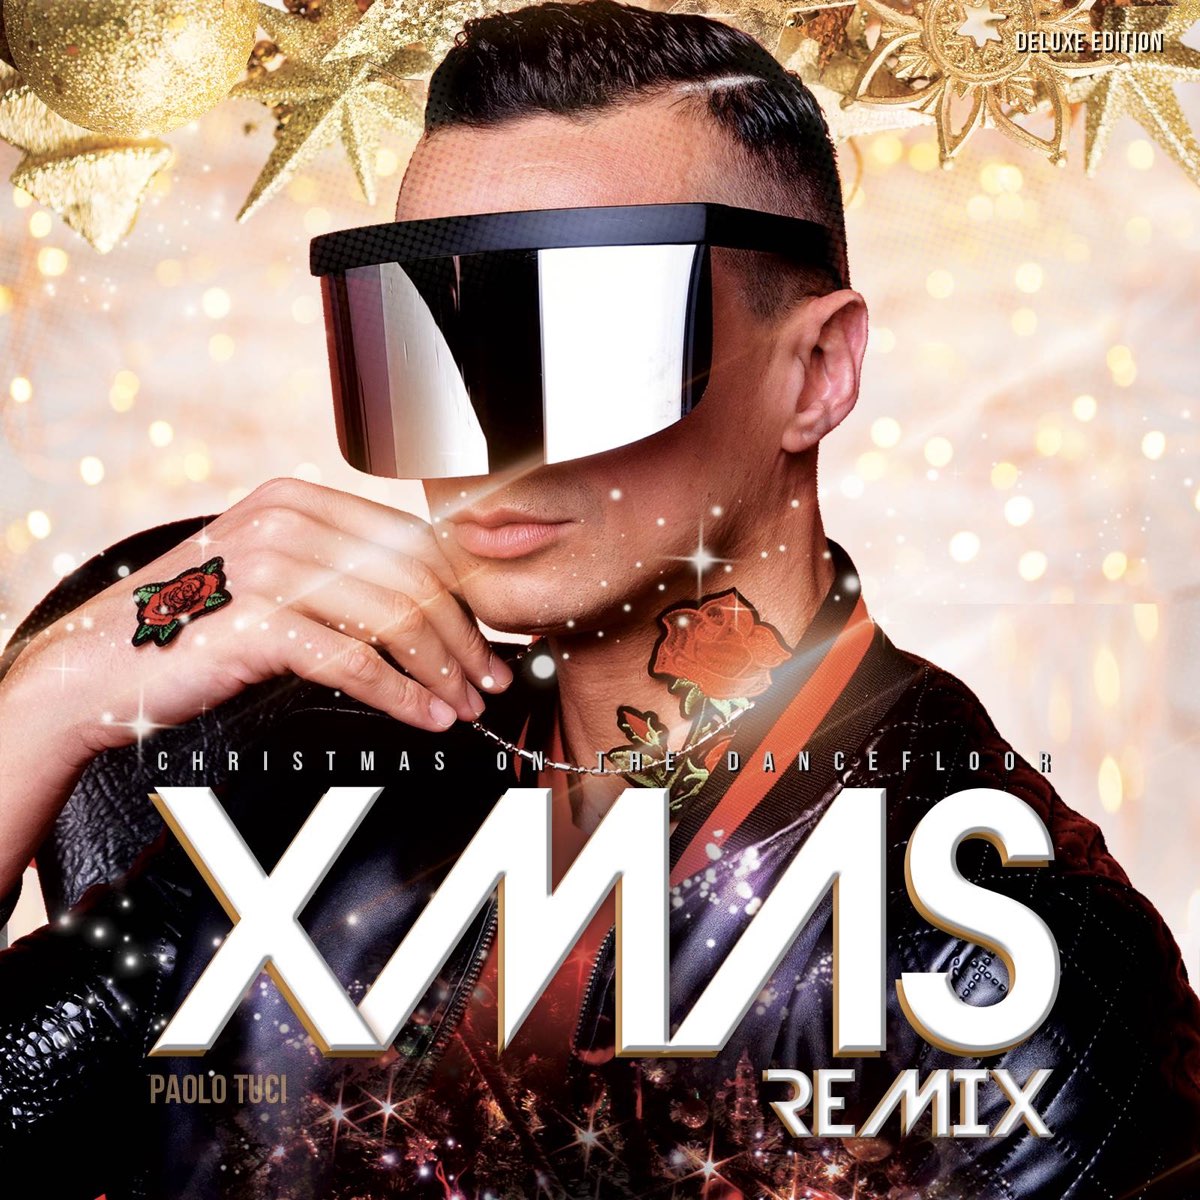 Xmas Remix (Christmas on the Dancefloor) [Deluxe Edition] by Paolo Tuci on  Apple Music